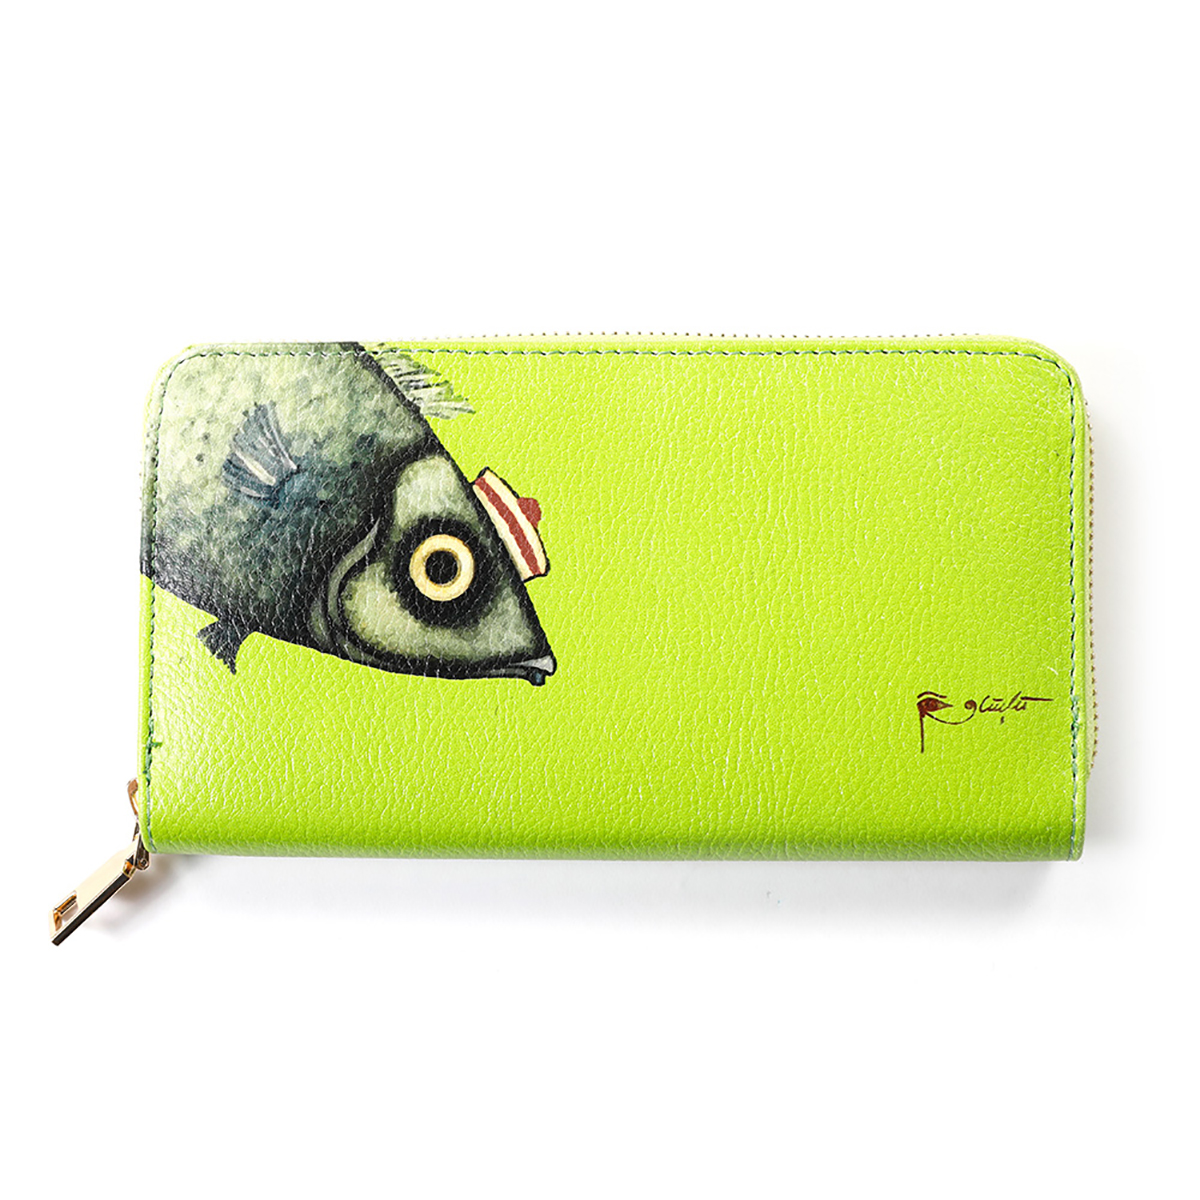 Biggdesign Women's Wallet, Card Holder Wallet, Clutch Purse, Credit Card Holder, Large Capacity Womens Wallets Carrying Cash, Credit Cards and Mobile Phone